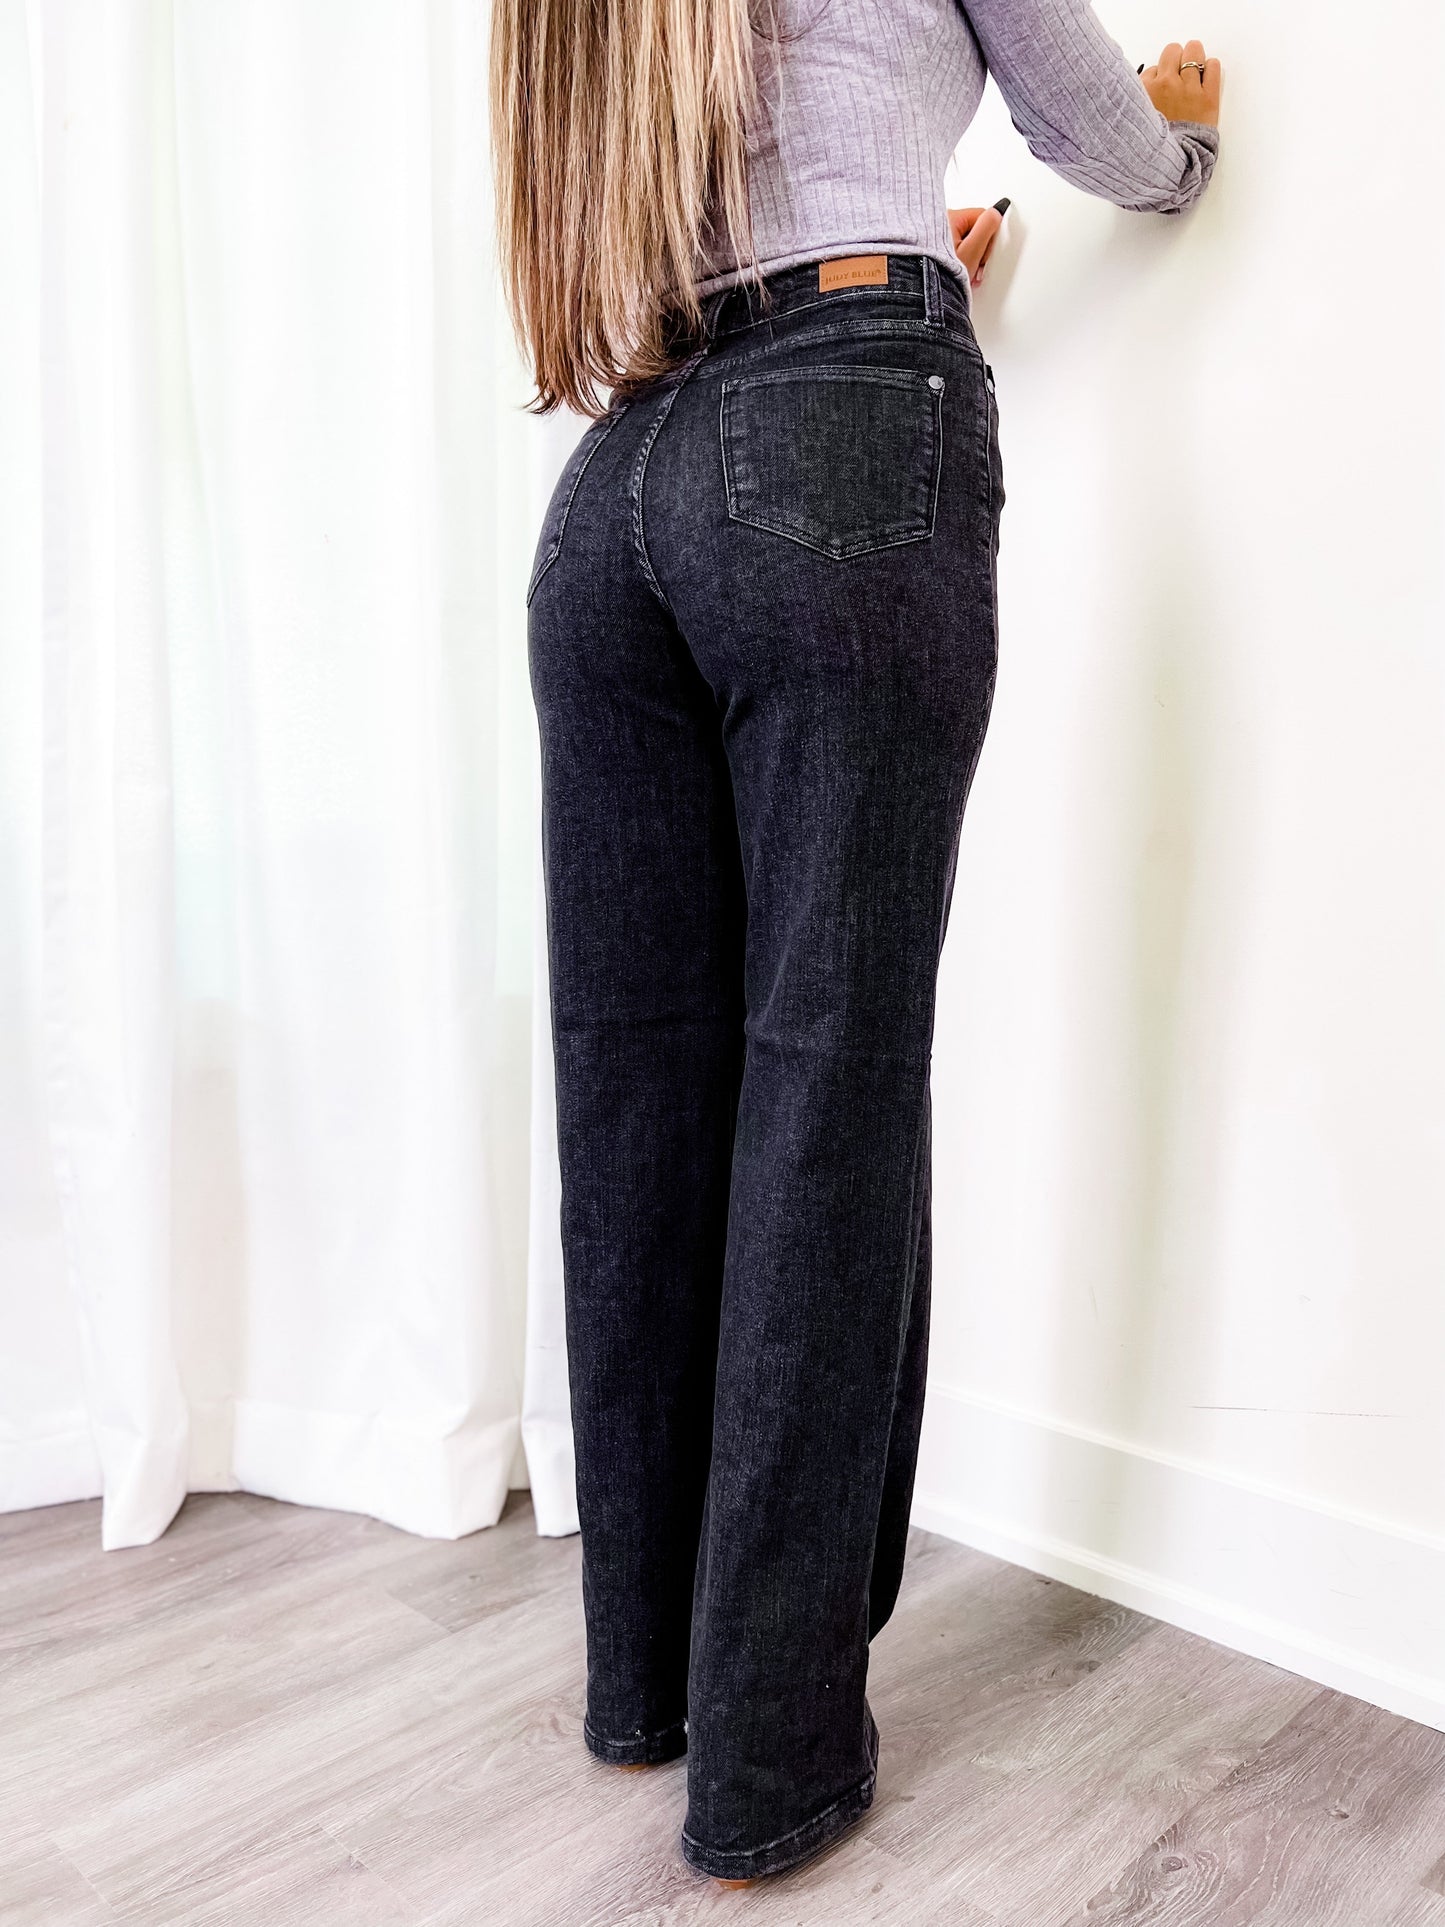 Judy Blue 50 Shades of Grey Button Fly Wide Leg Black Jeans